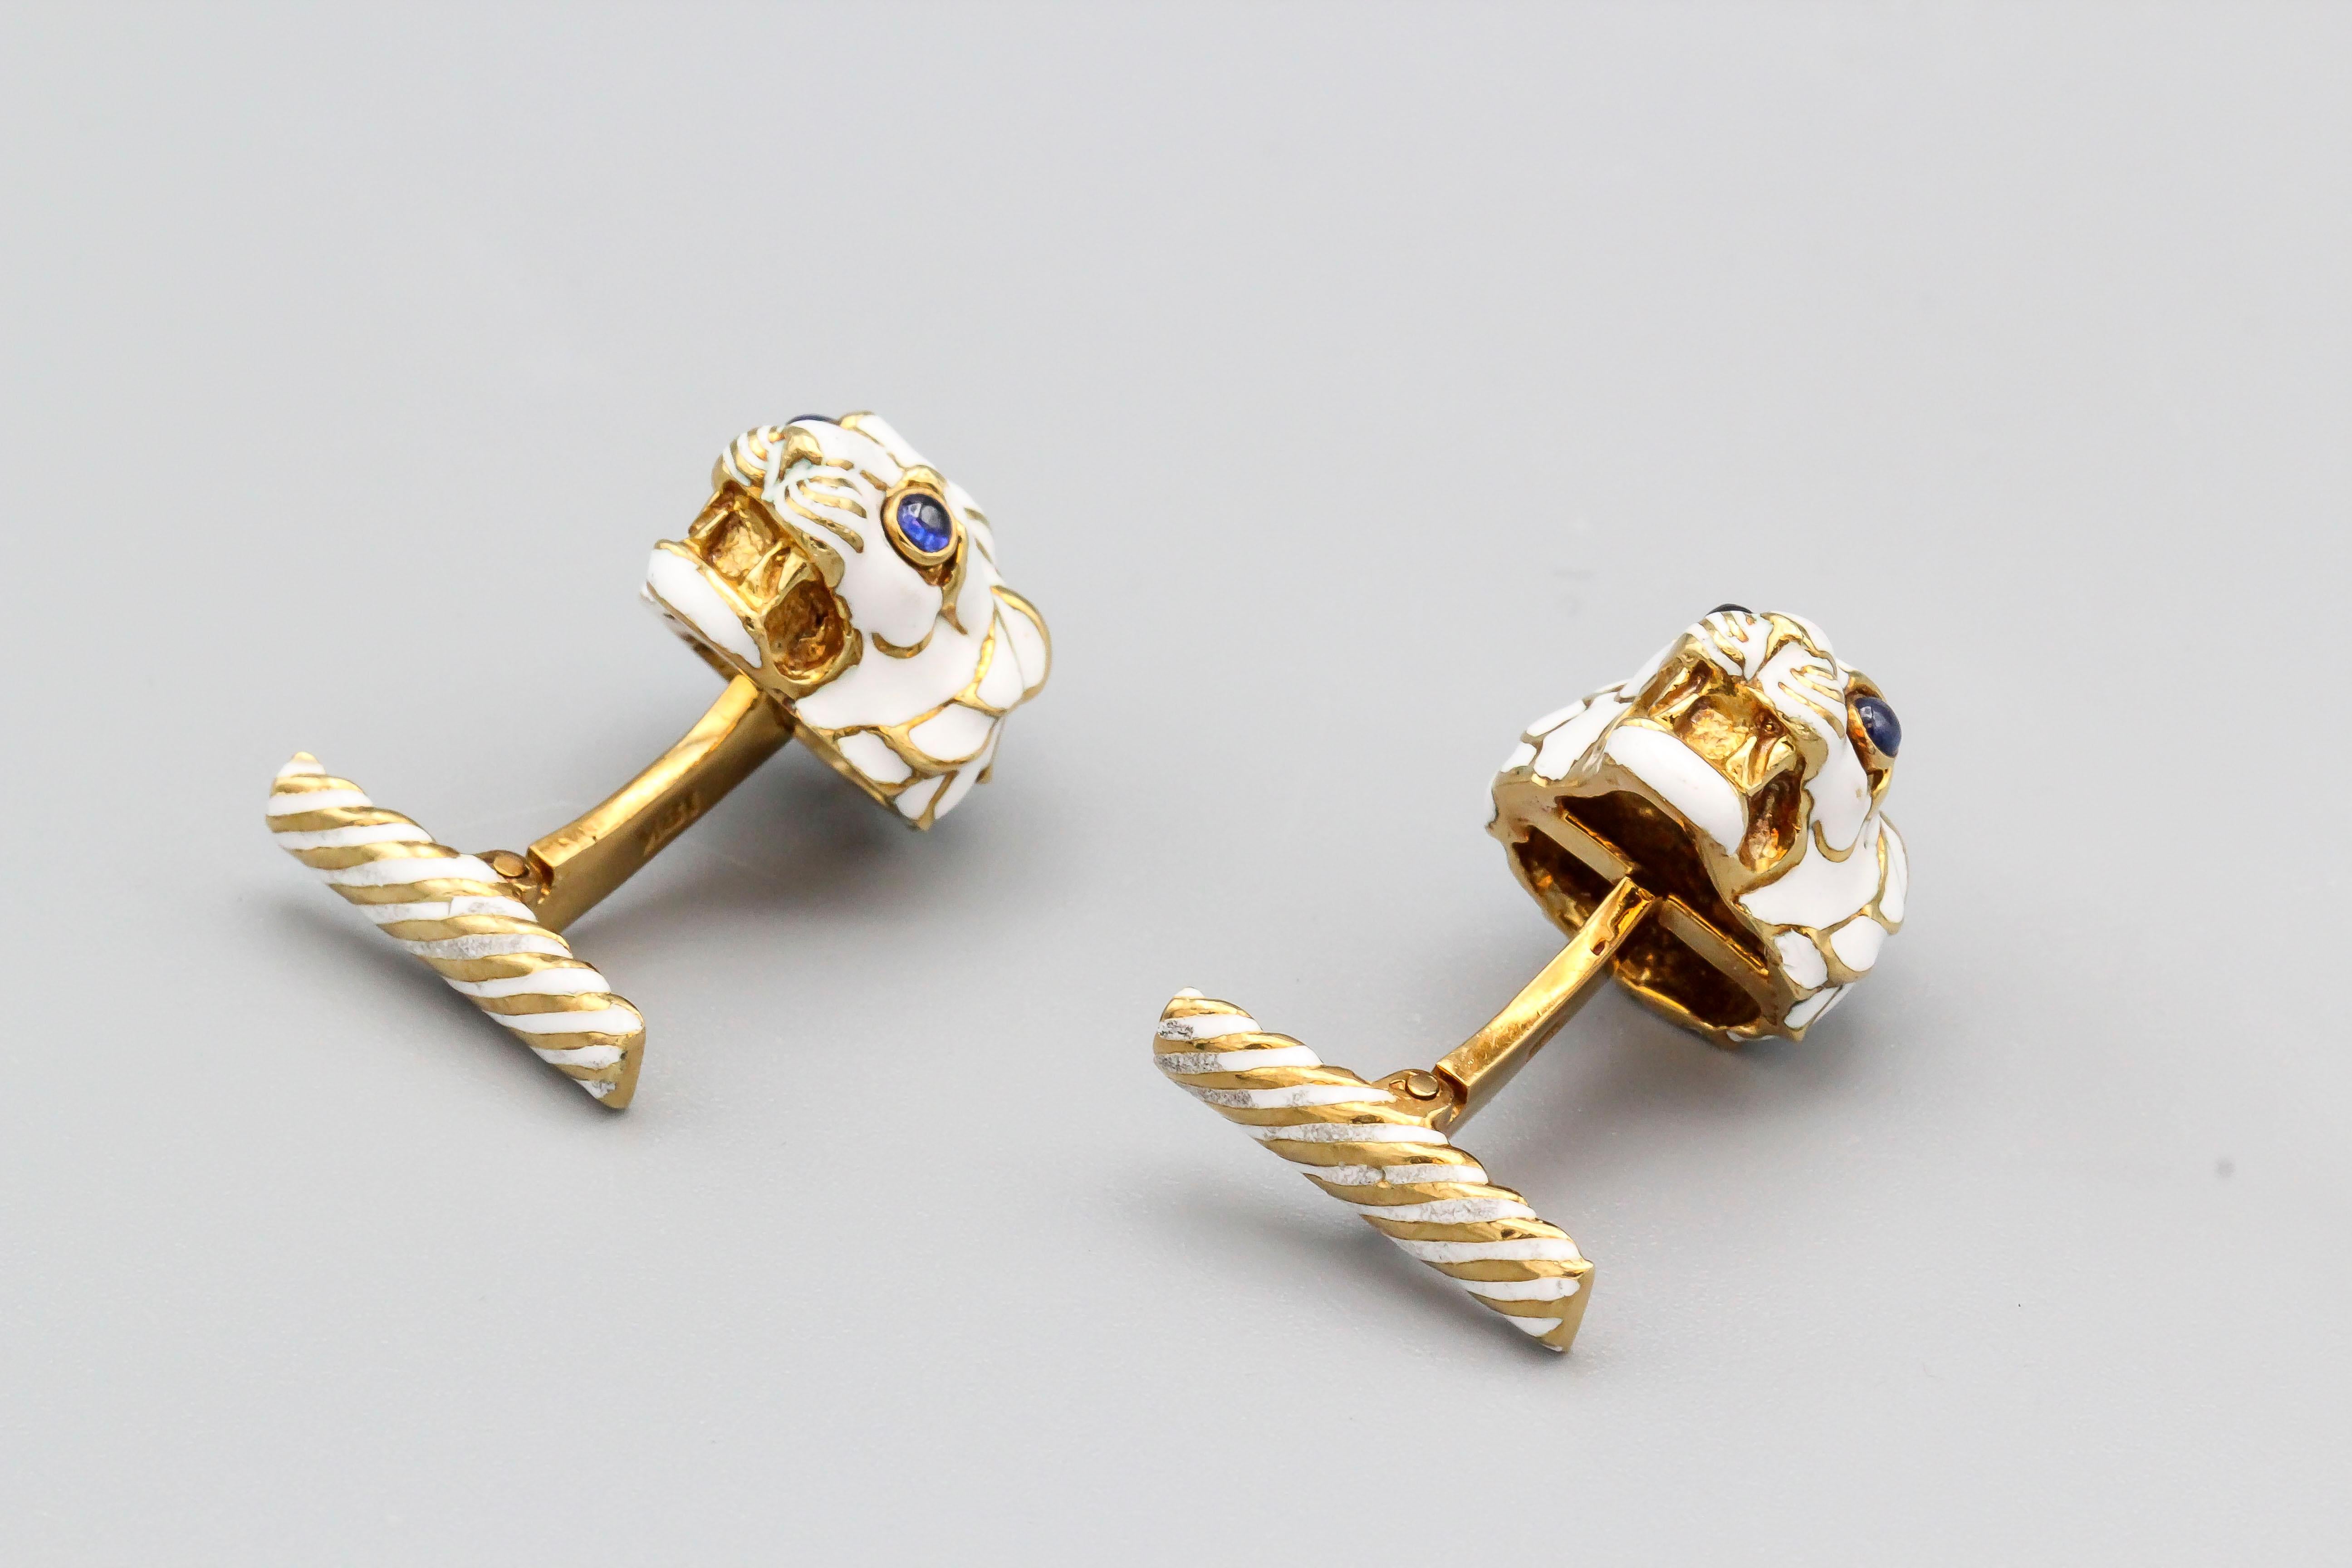 Fine pair of cabochon sapphire and 18K yellow gold cufflinks by David Webb. They resemble a lion's head, with cabochon sapphire as eyes and white enamel.

Hallmarks: Webb, copyright, 18K.